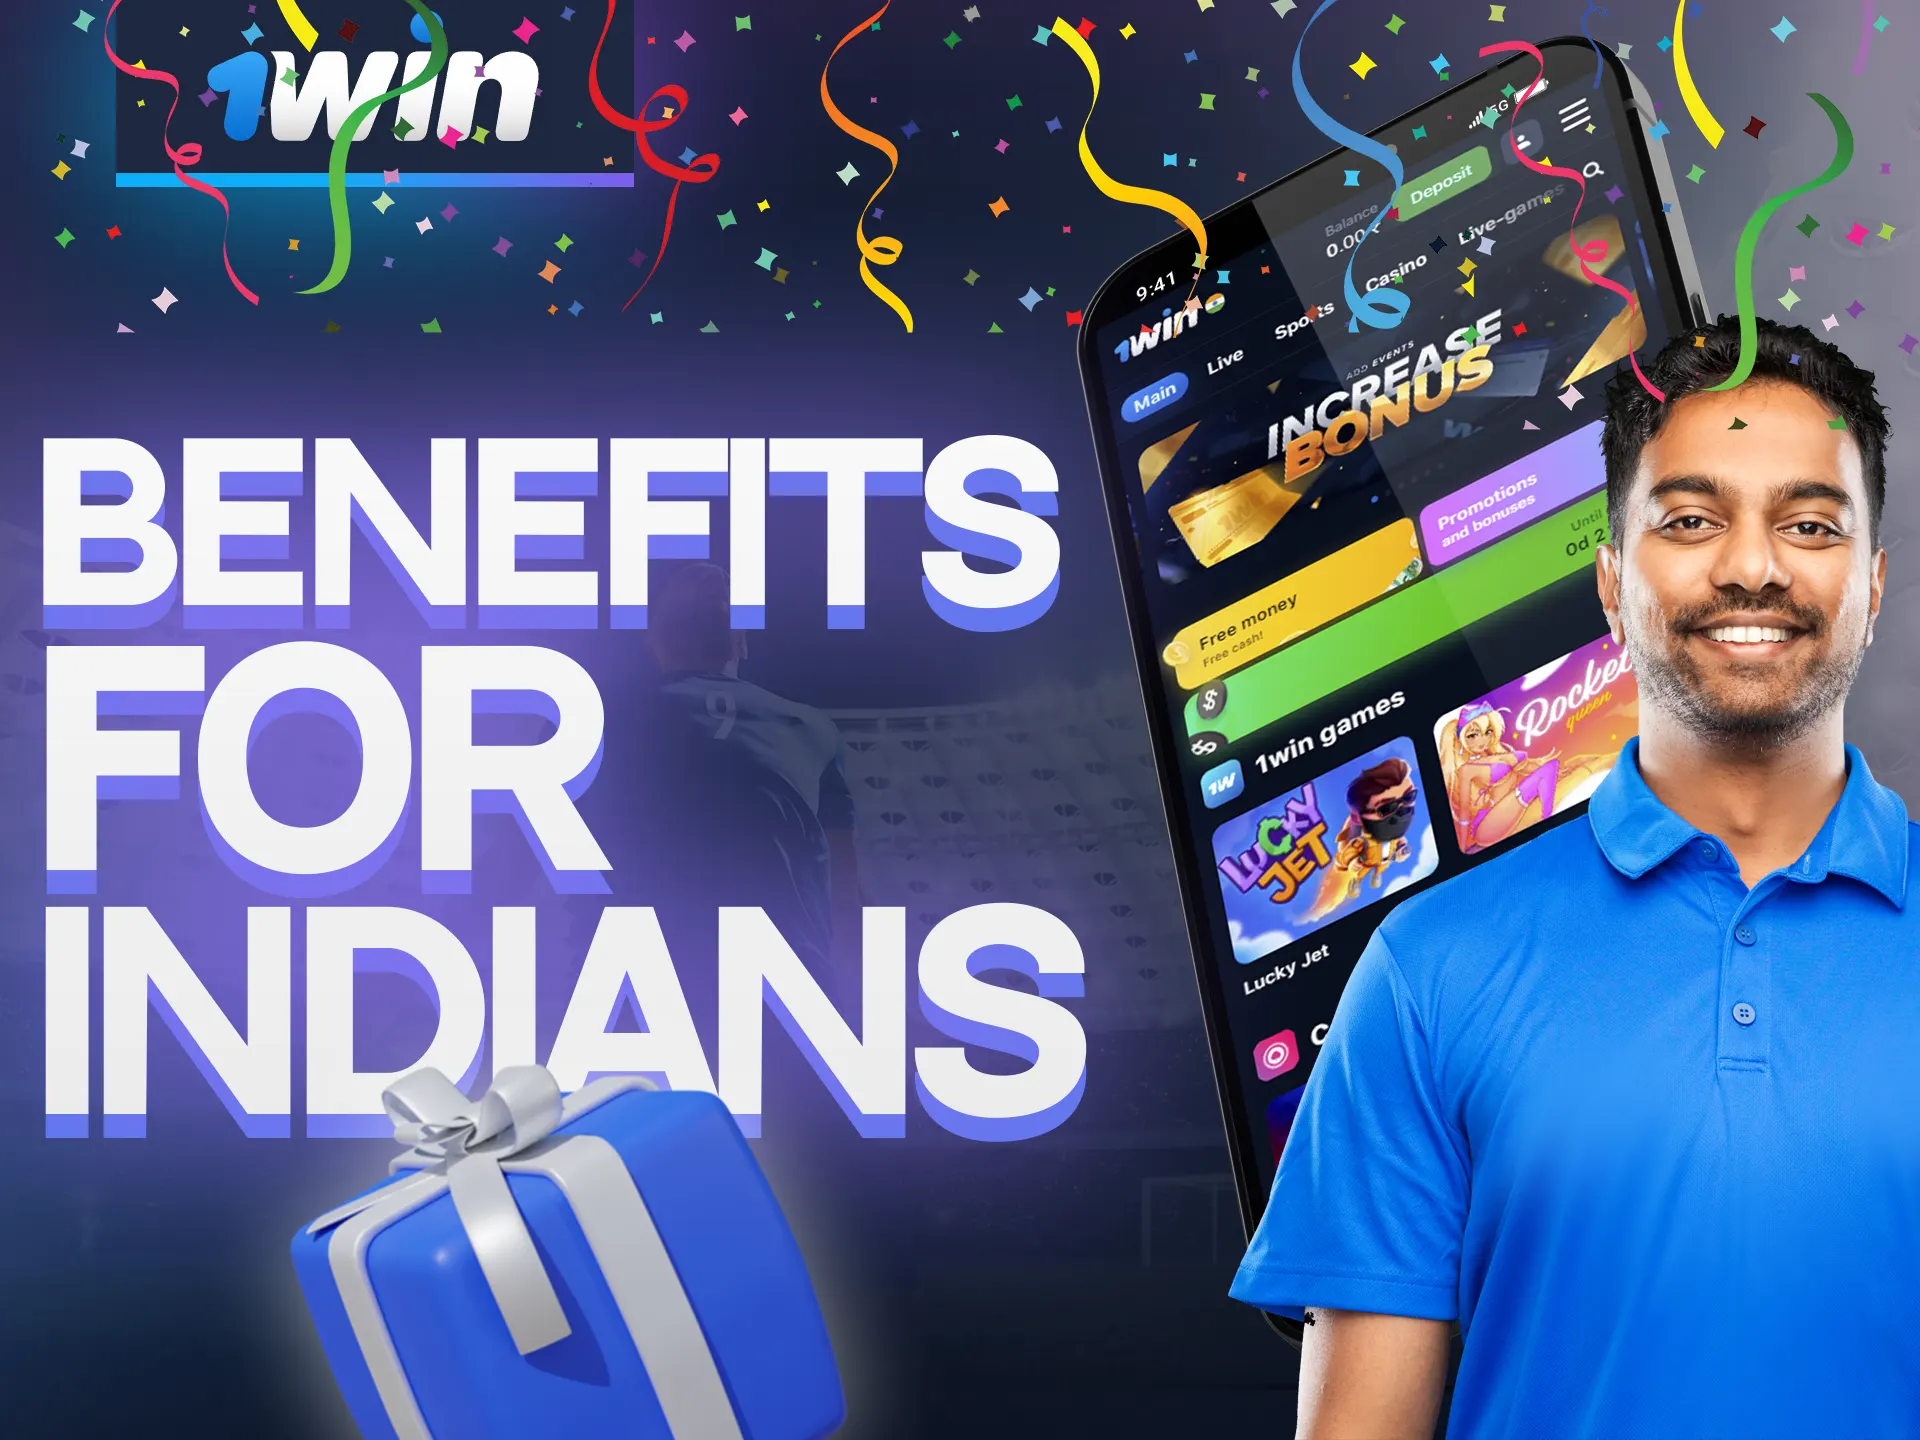 1Win app offers many bonuses and benefits to its players.